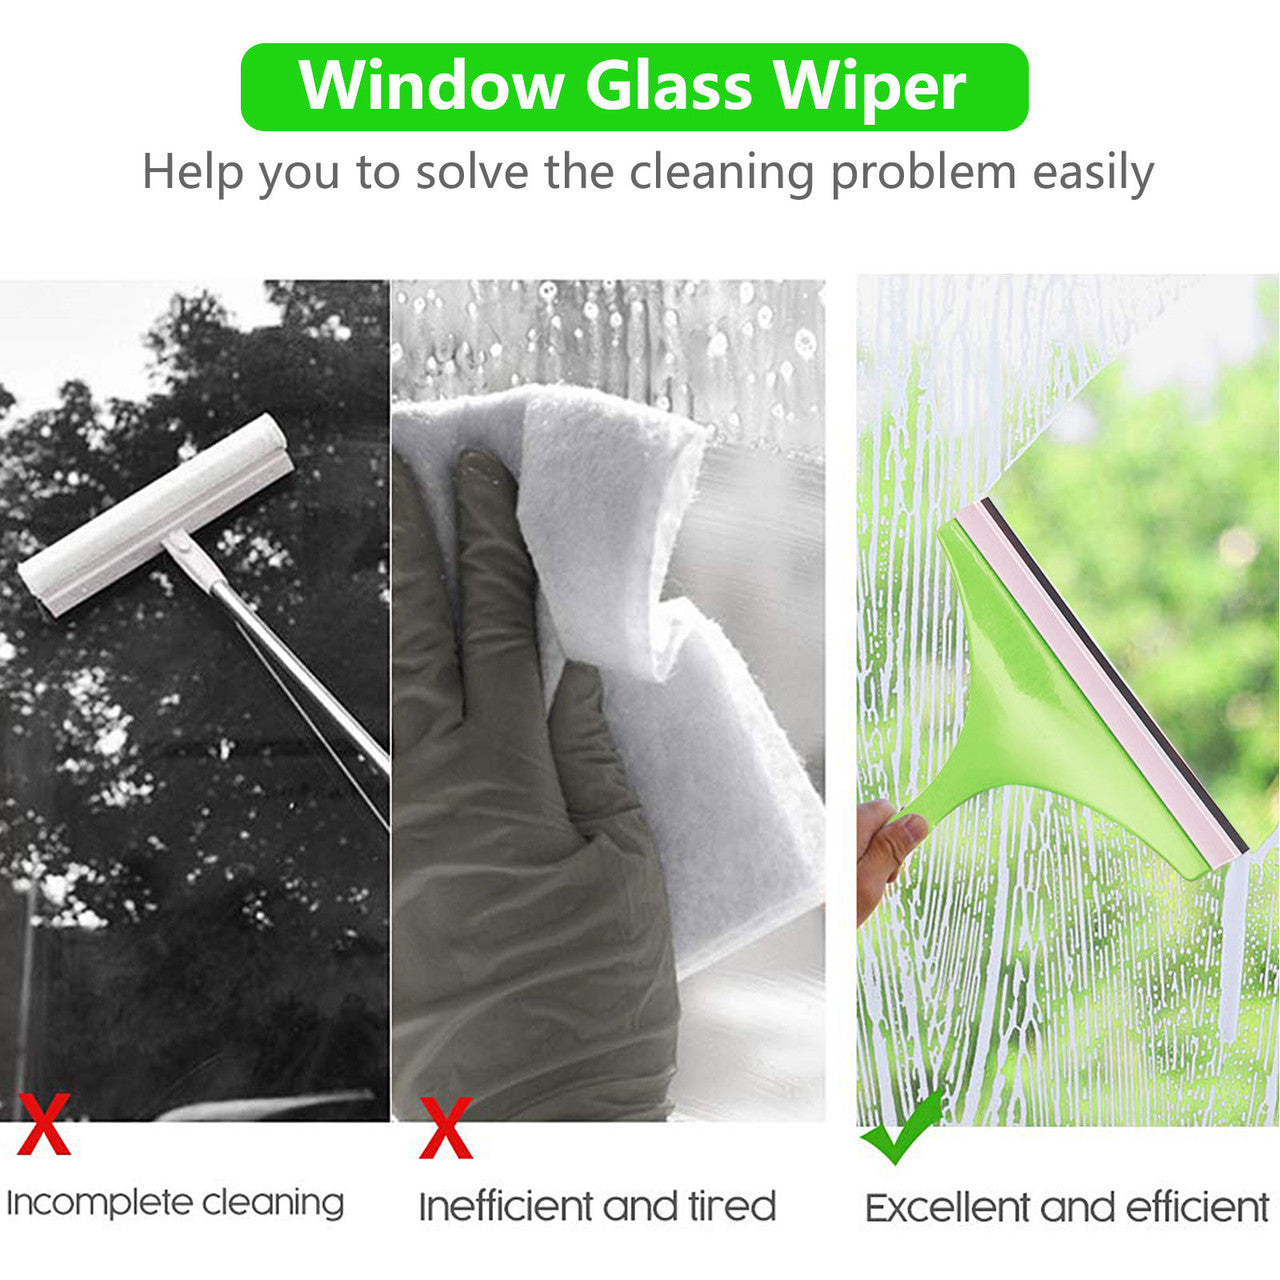 Rubber Squeegees, Window Shower Glass Squeegee Cleaner with Hanging Hole, Squeegee Scraper Window Cleaner, Wiper Cleaning Tool for Bathroom Kitchen Mirror Car Window Glass, Random Color, 3Pcs